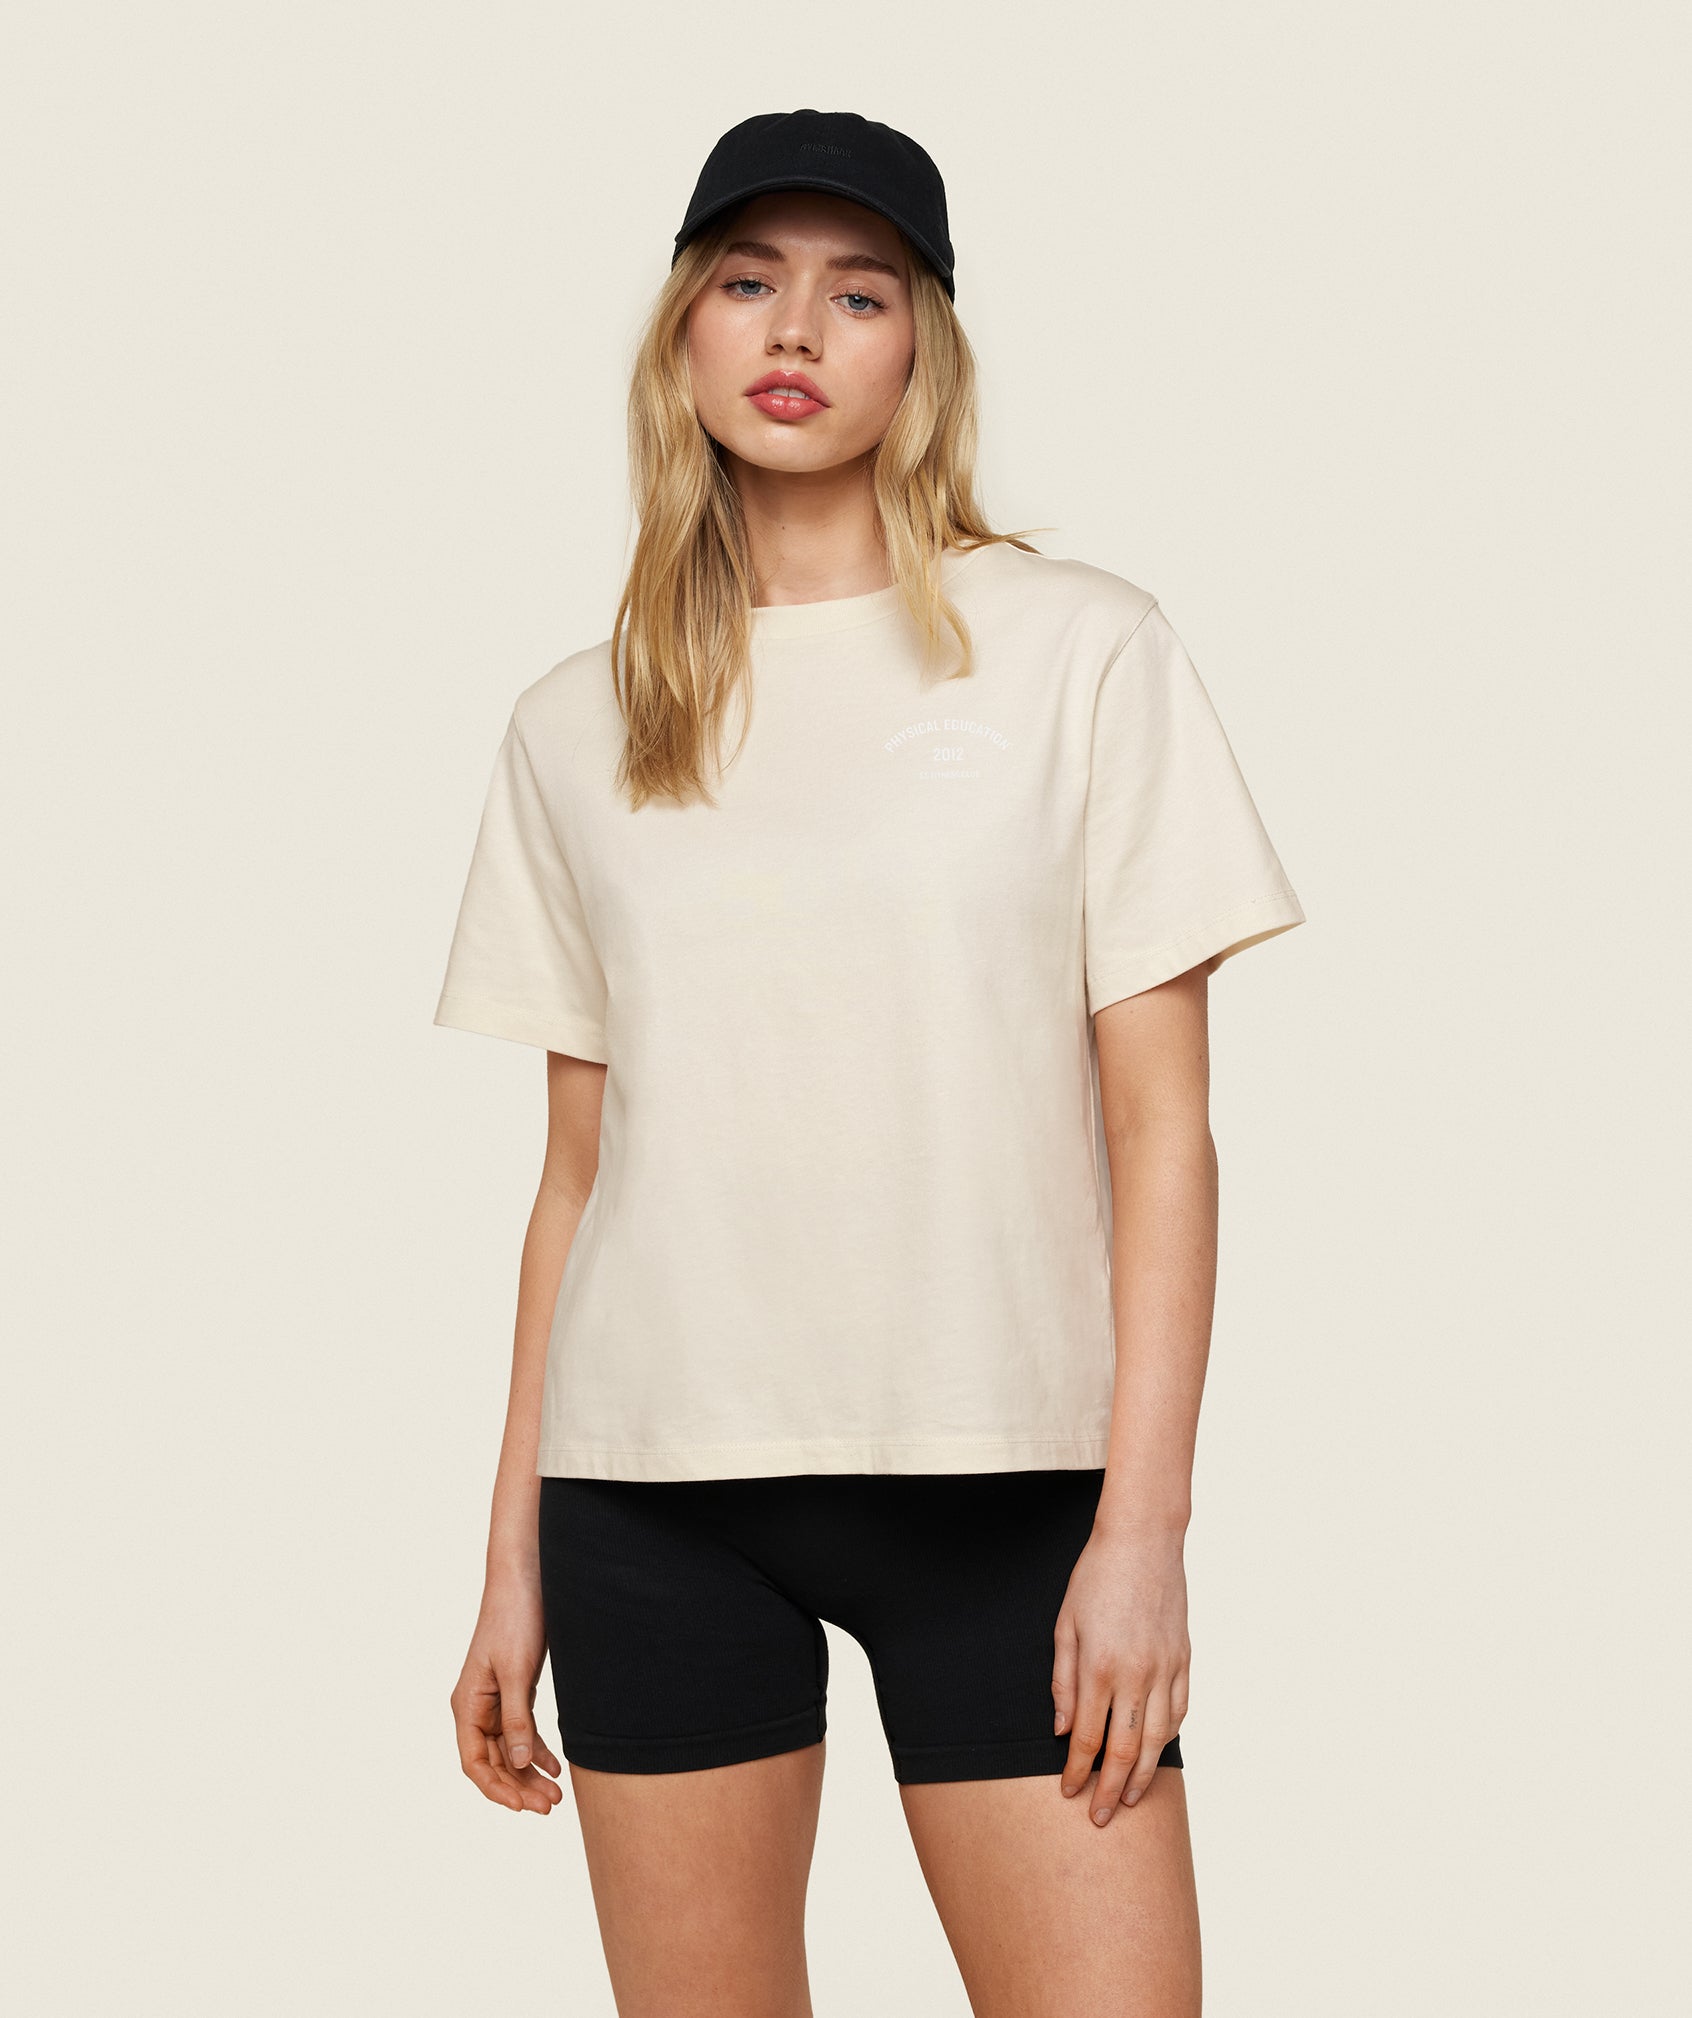 Phys Ed Graphic T-Shirt in Ecru White is out of stock